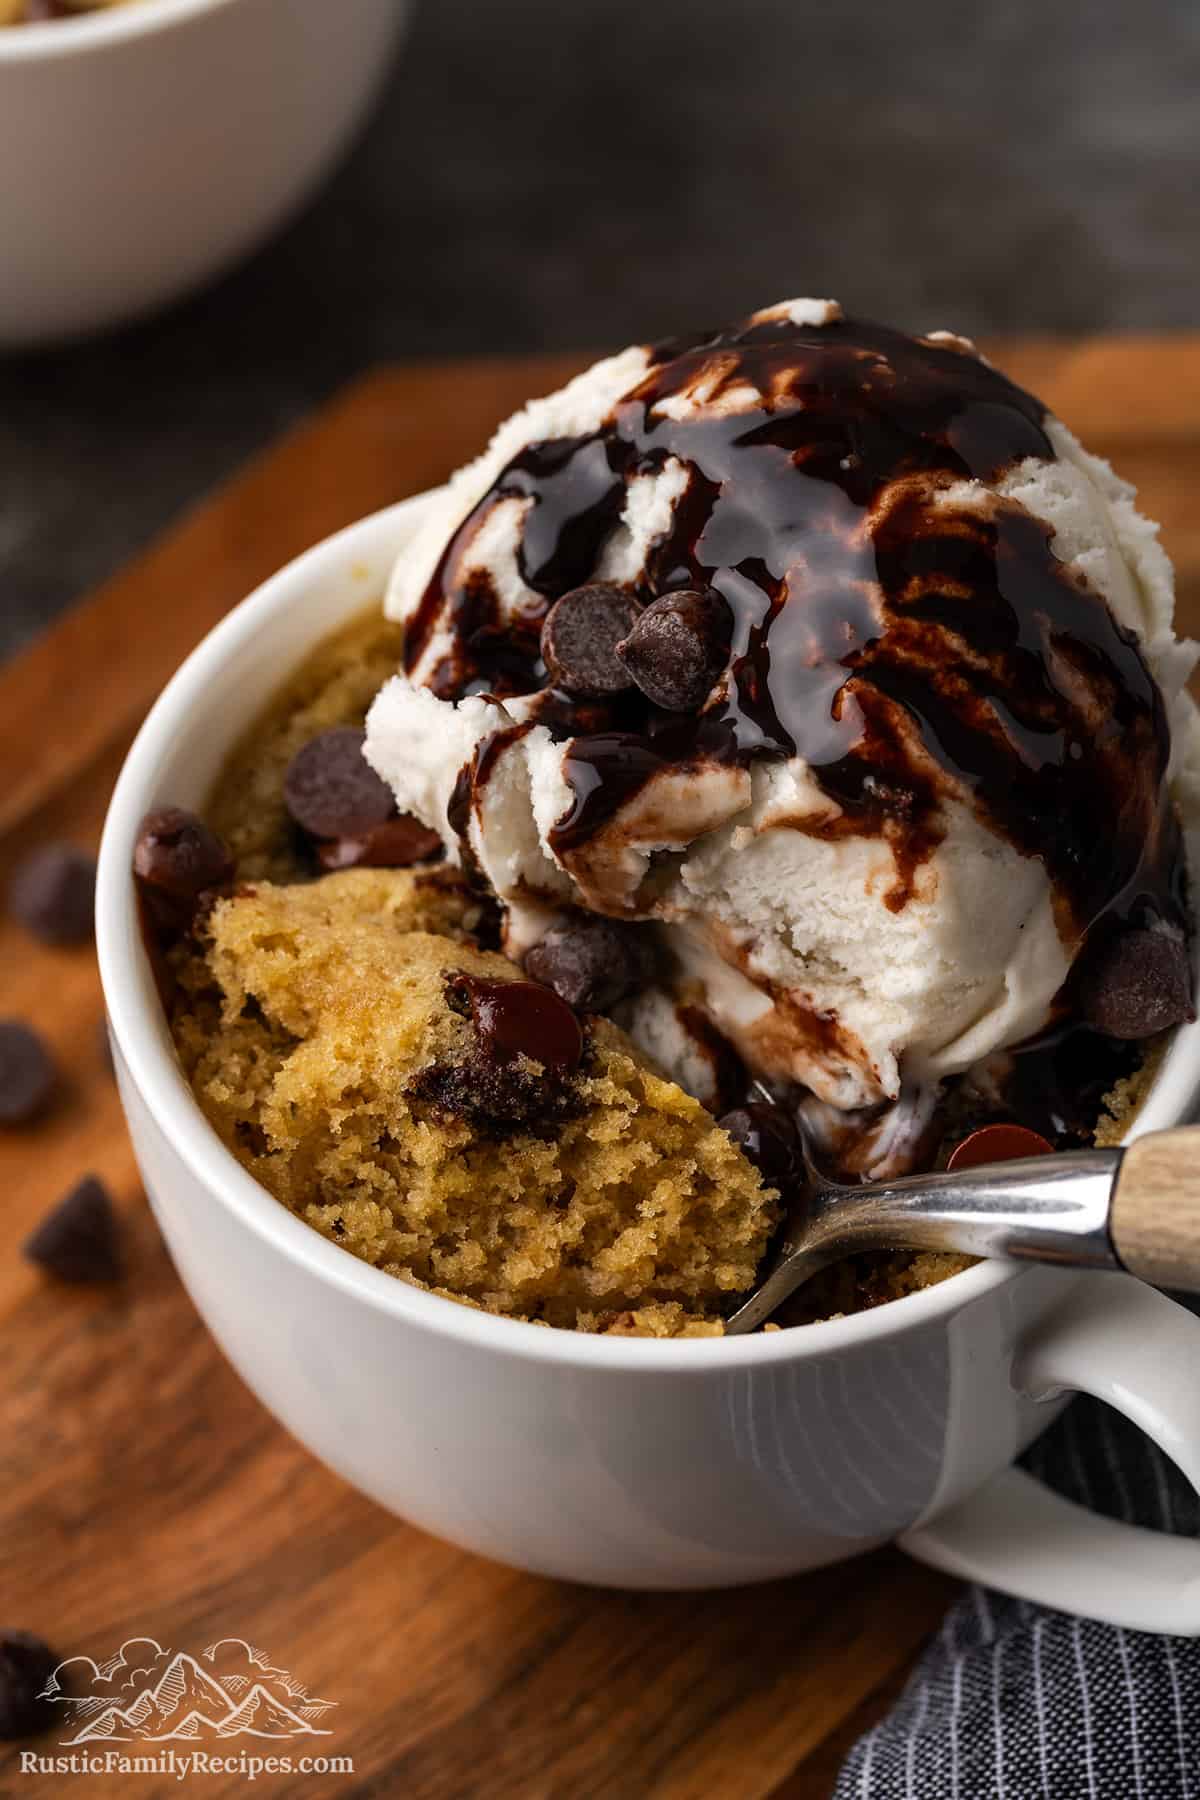 Chocolate chip cookie in a mug with ice cream and chocolate syrup